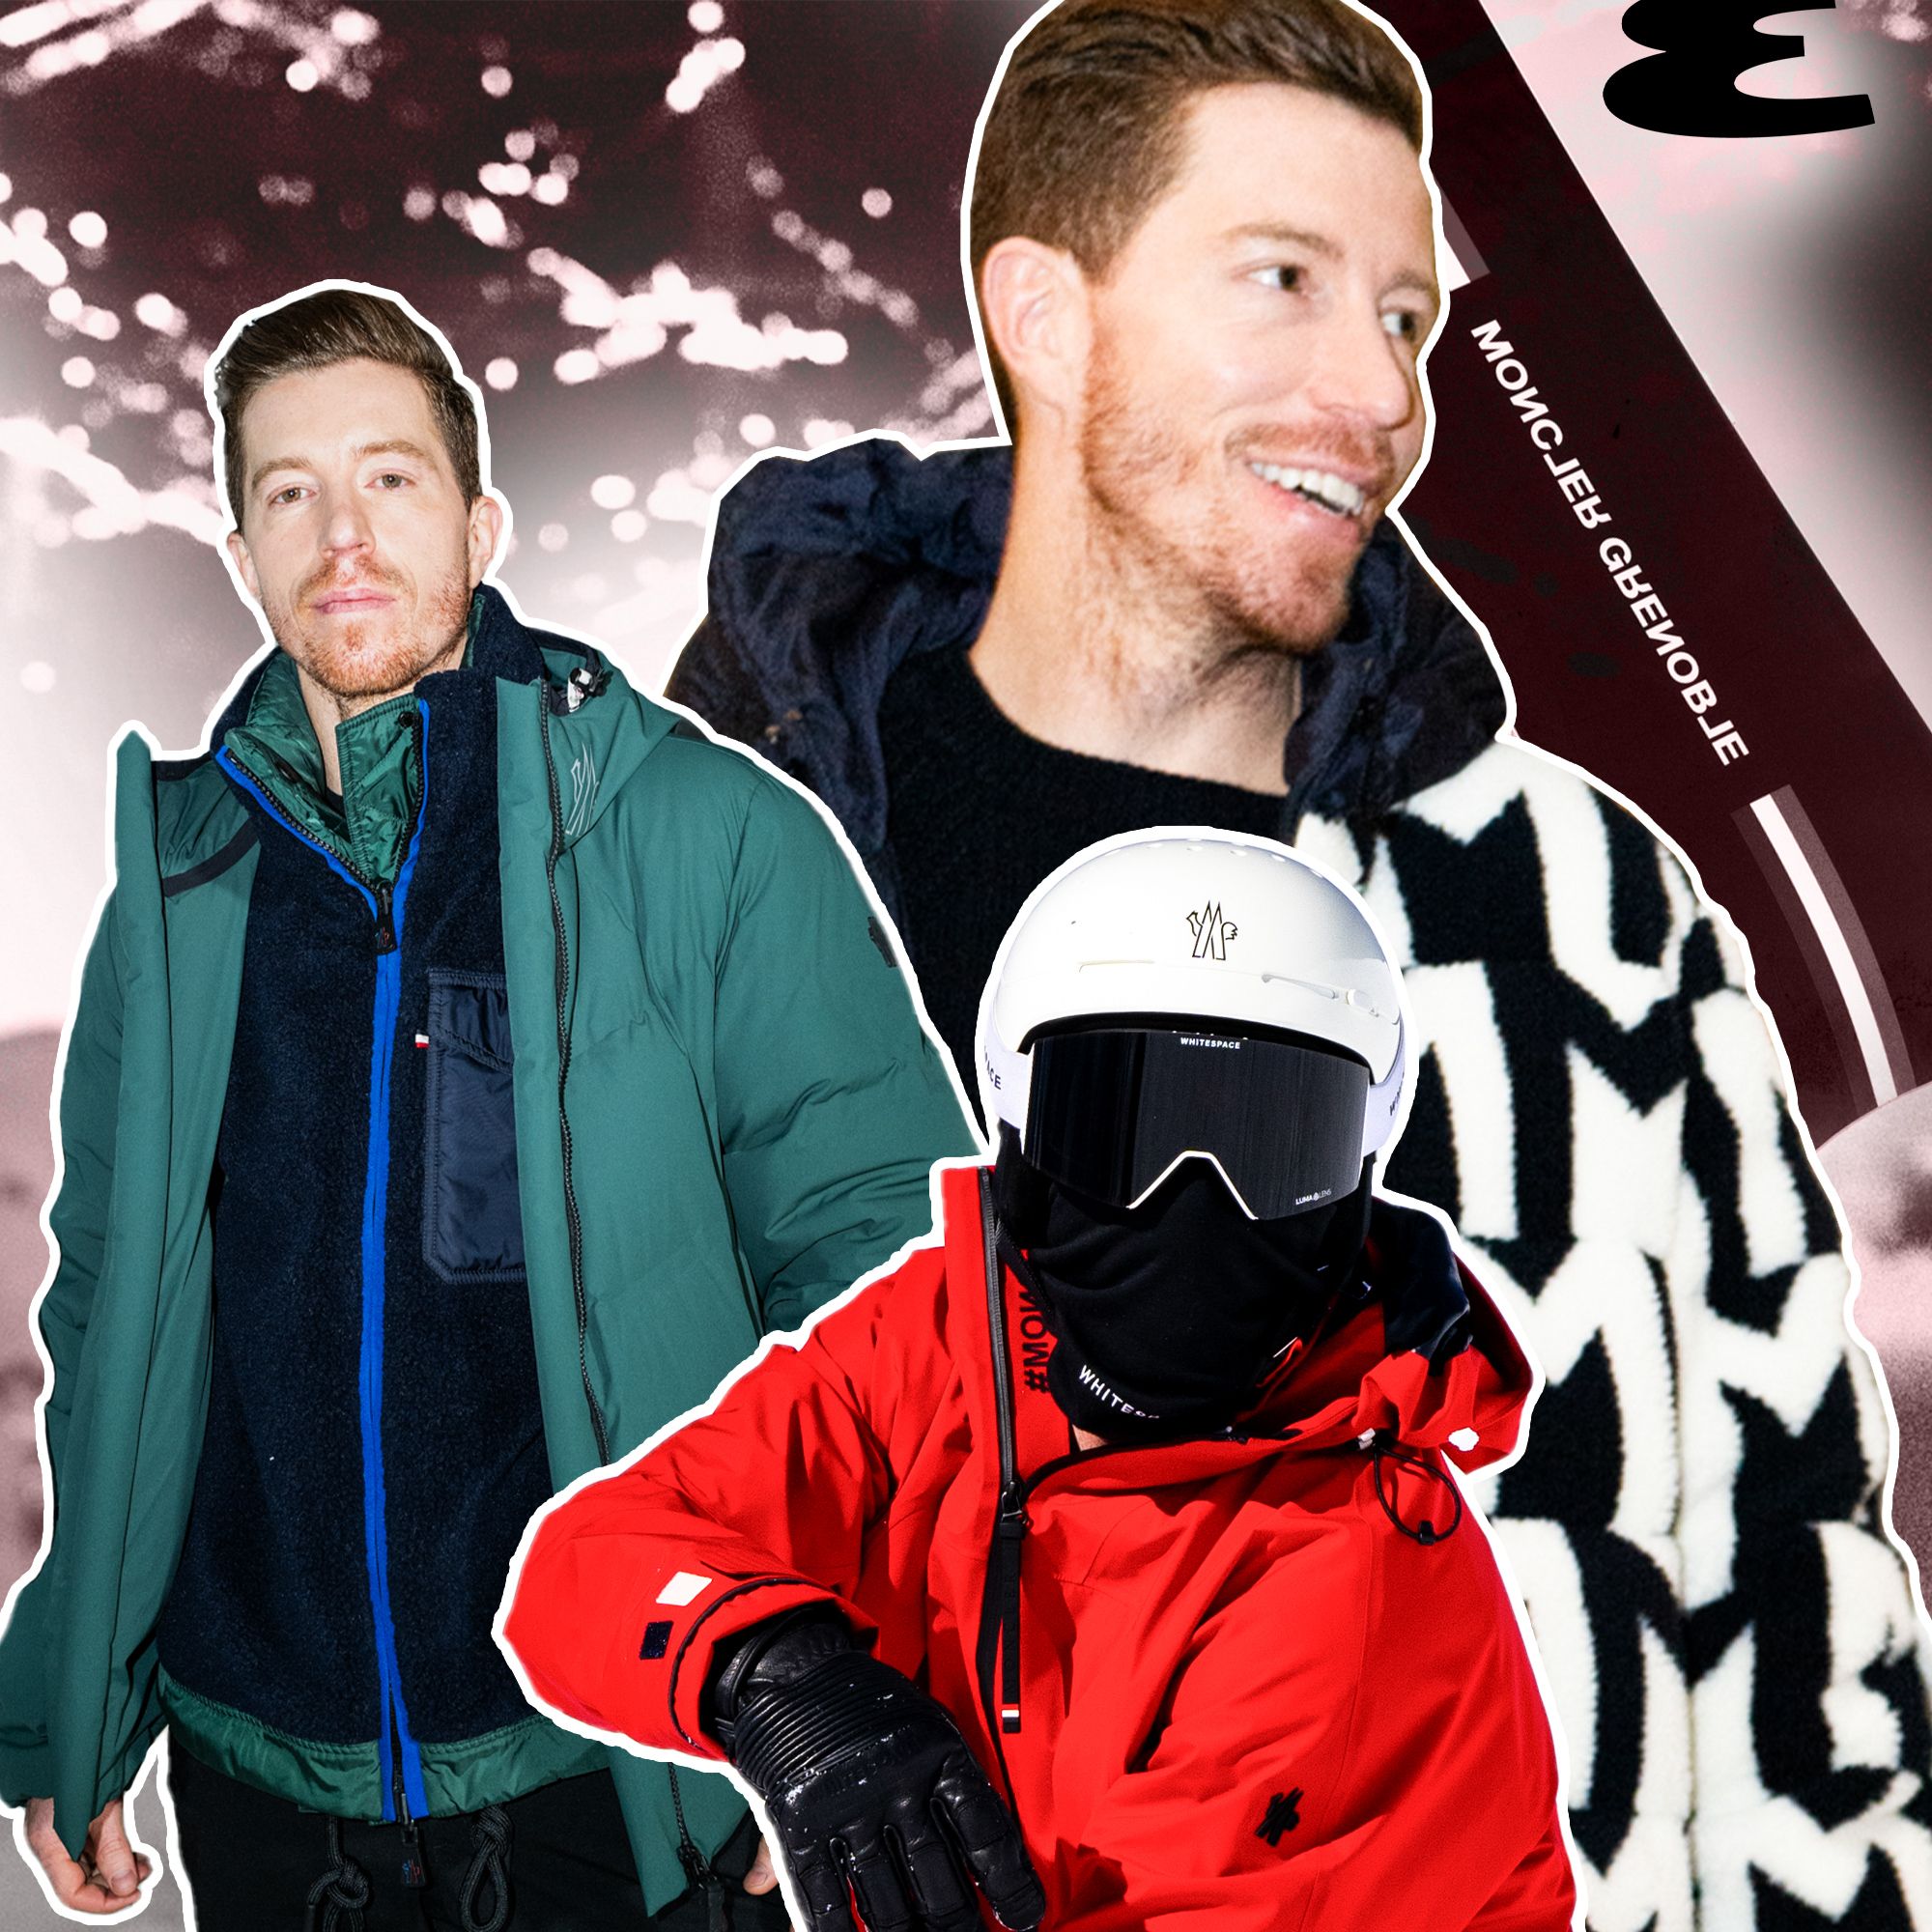 Shaun White Is in His Fashion Ascent